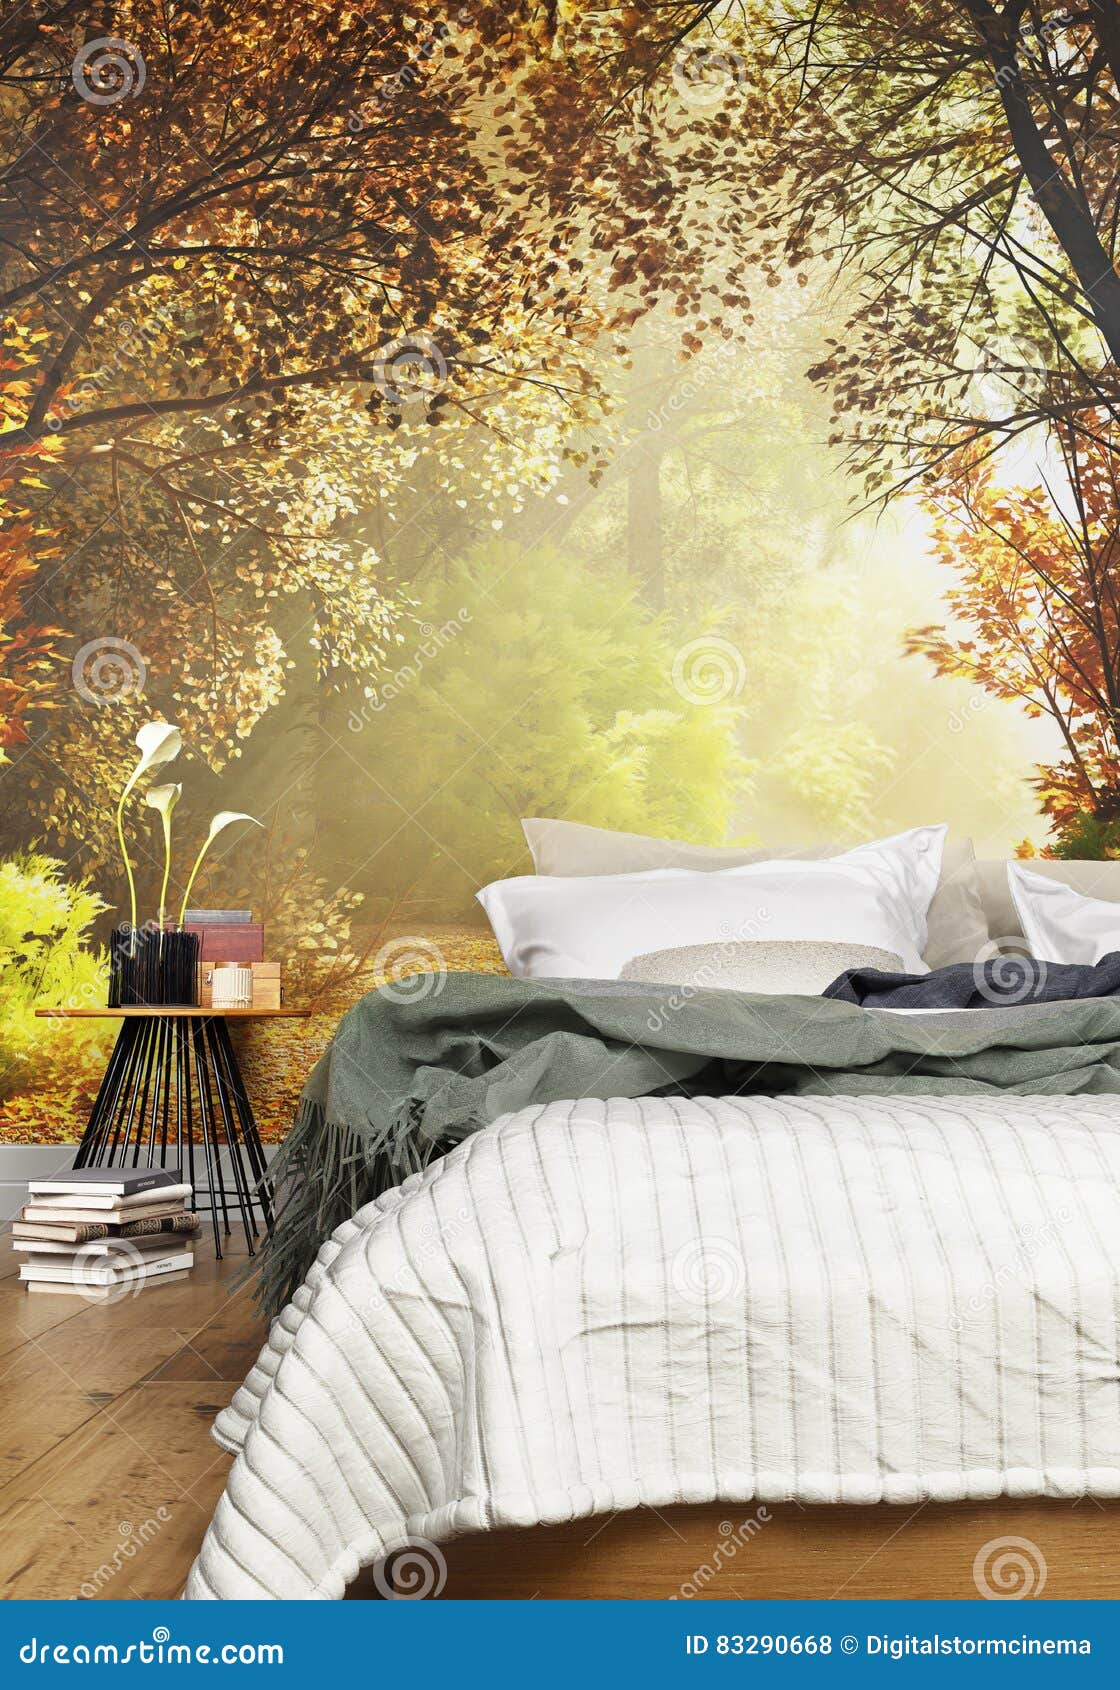 Interior of a Cozy Rustic Bedroom with a Country Nature Wall Mural Background. Stock Illustration Illustration of night: 83290668